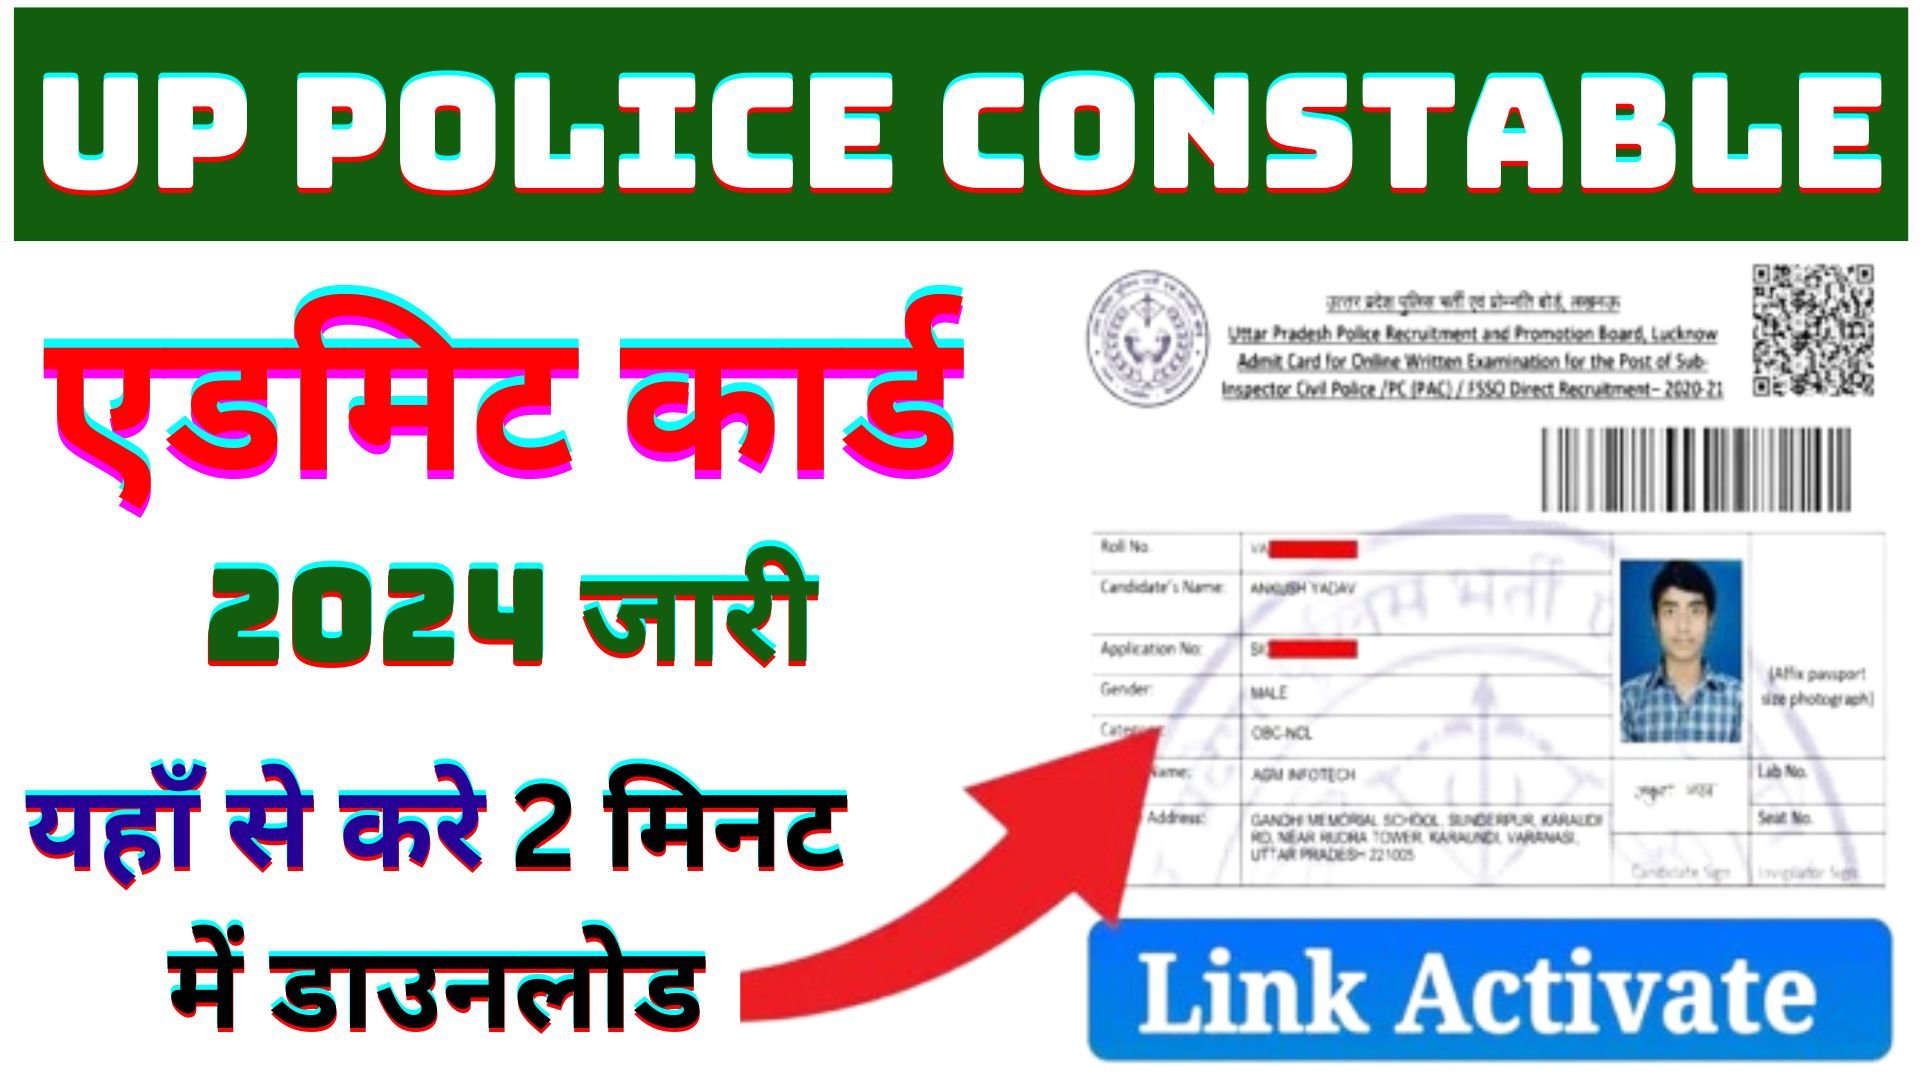 UP Police Constable Admit Card Exam City 2024: How to download up police constable admit card 2024